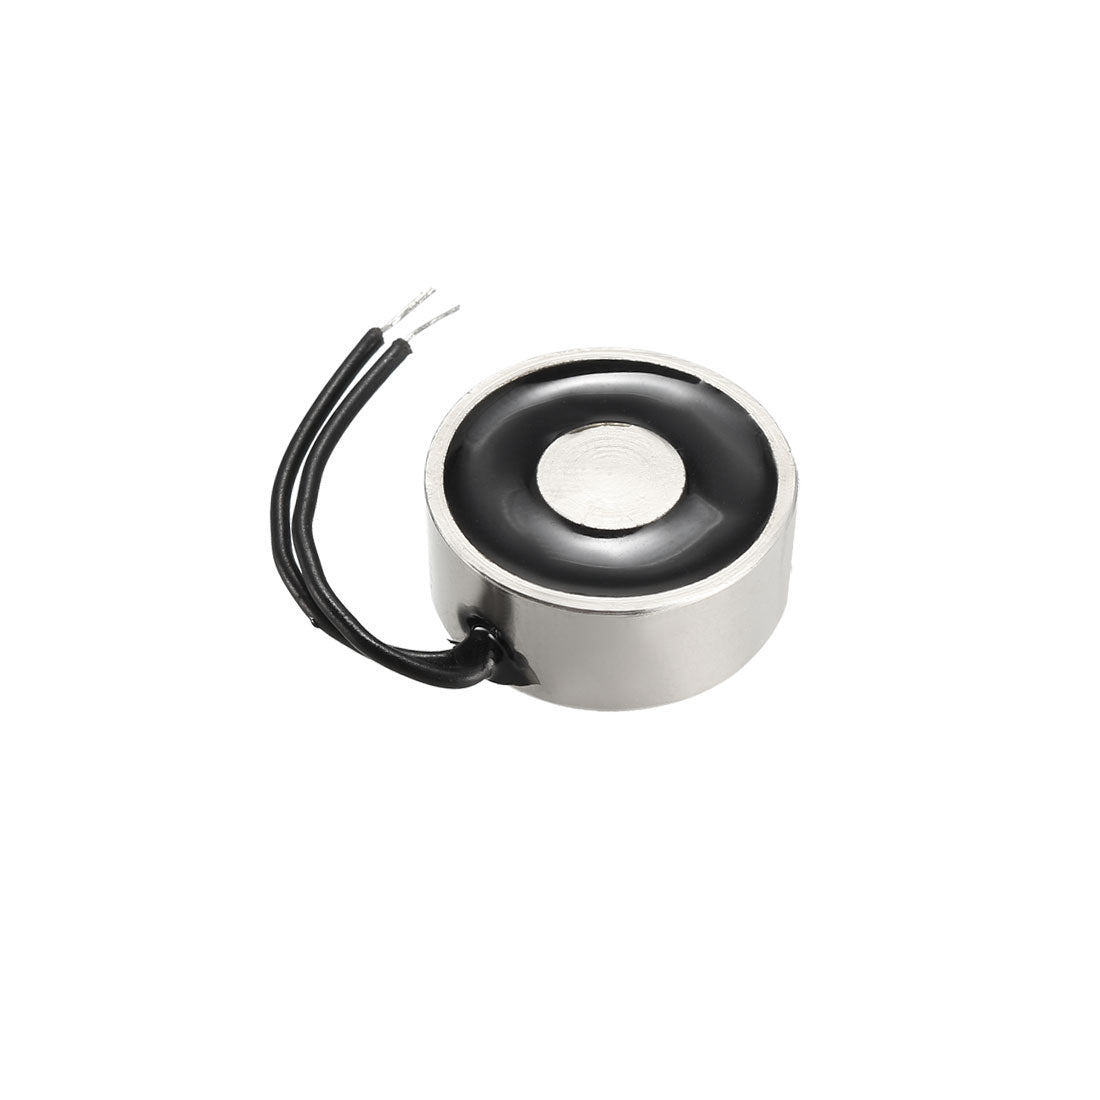 uxcell Uxcell DC12V 12N 1.2KG Lift Holding Electromagnet Sucking Disc Electric Lifting Magnet Solenoid